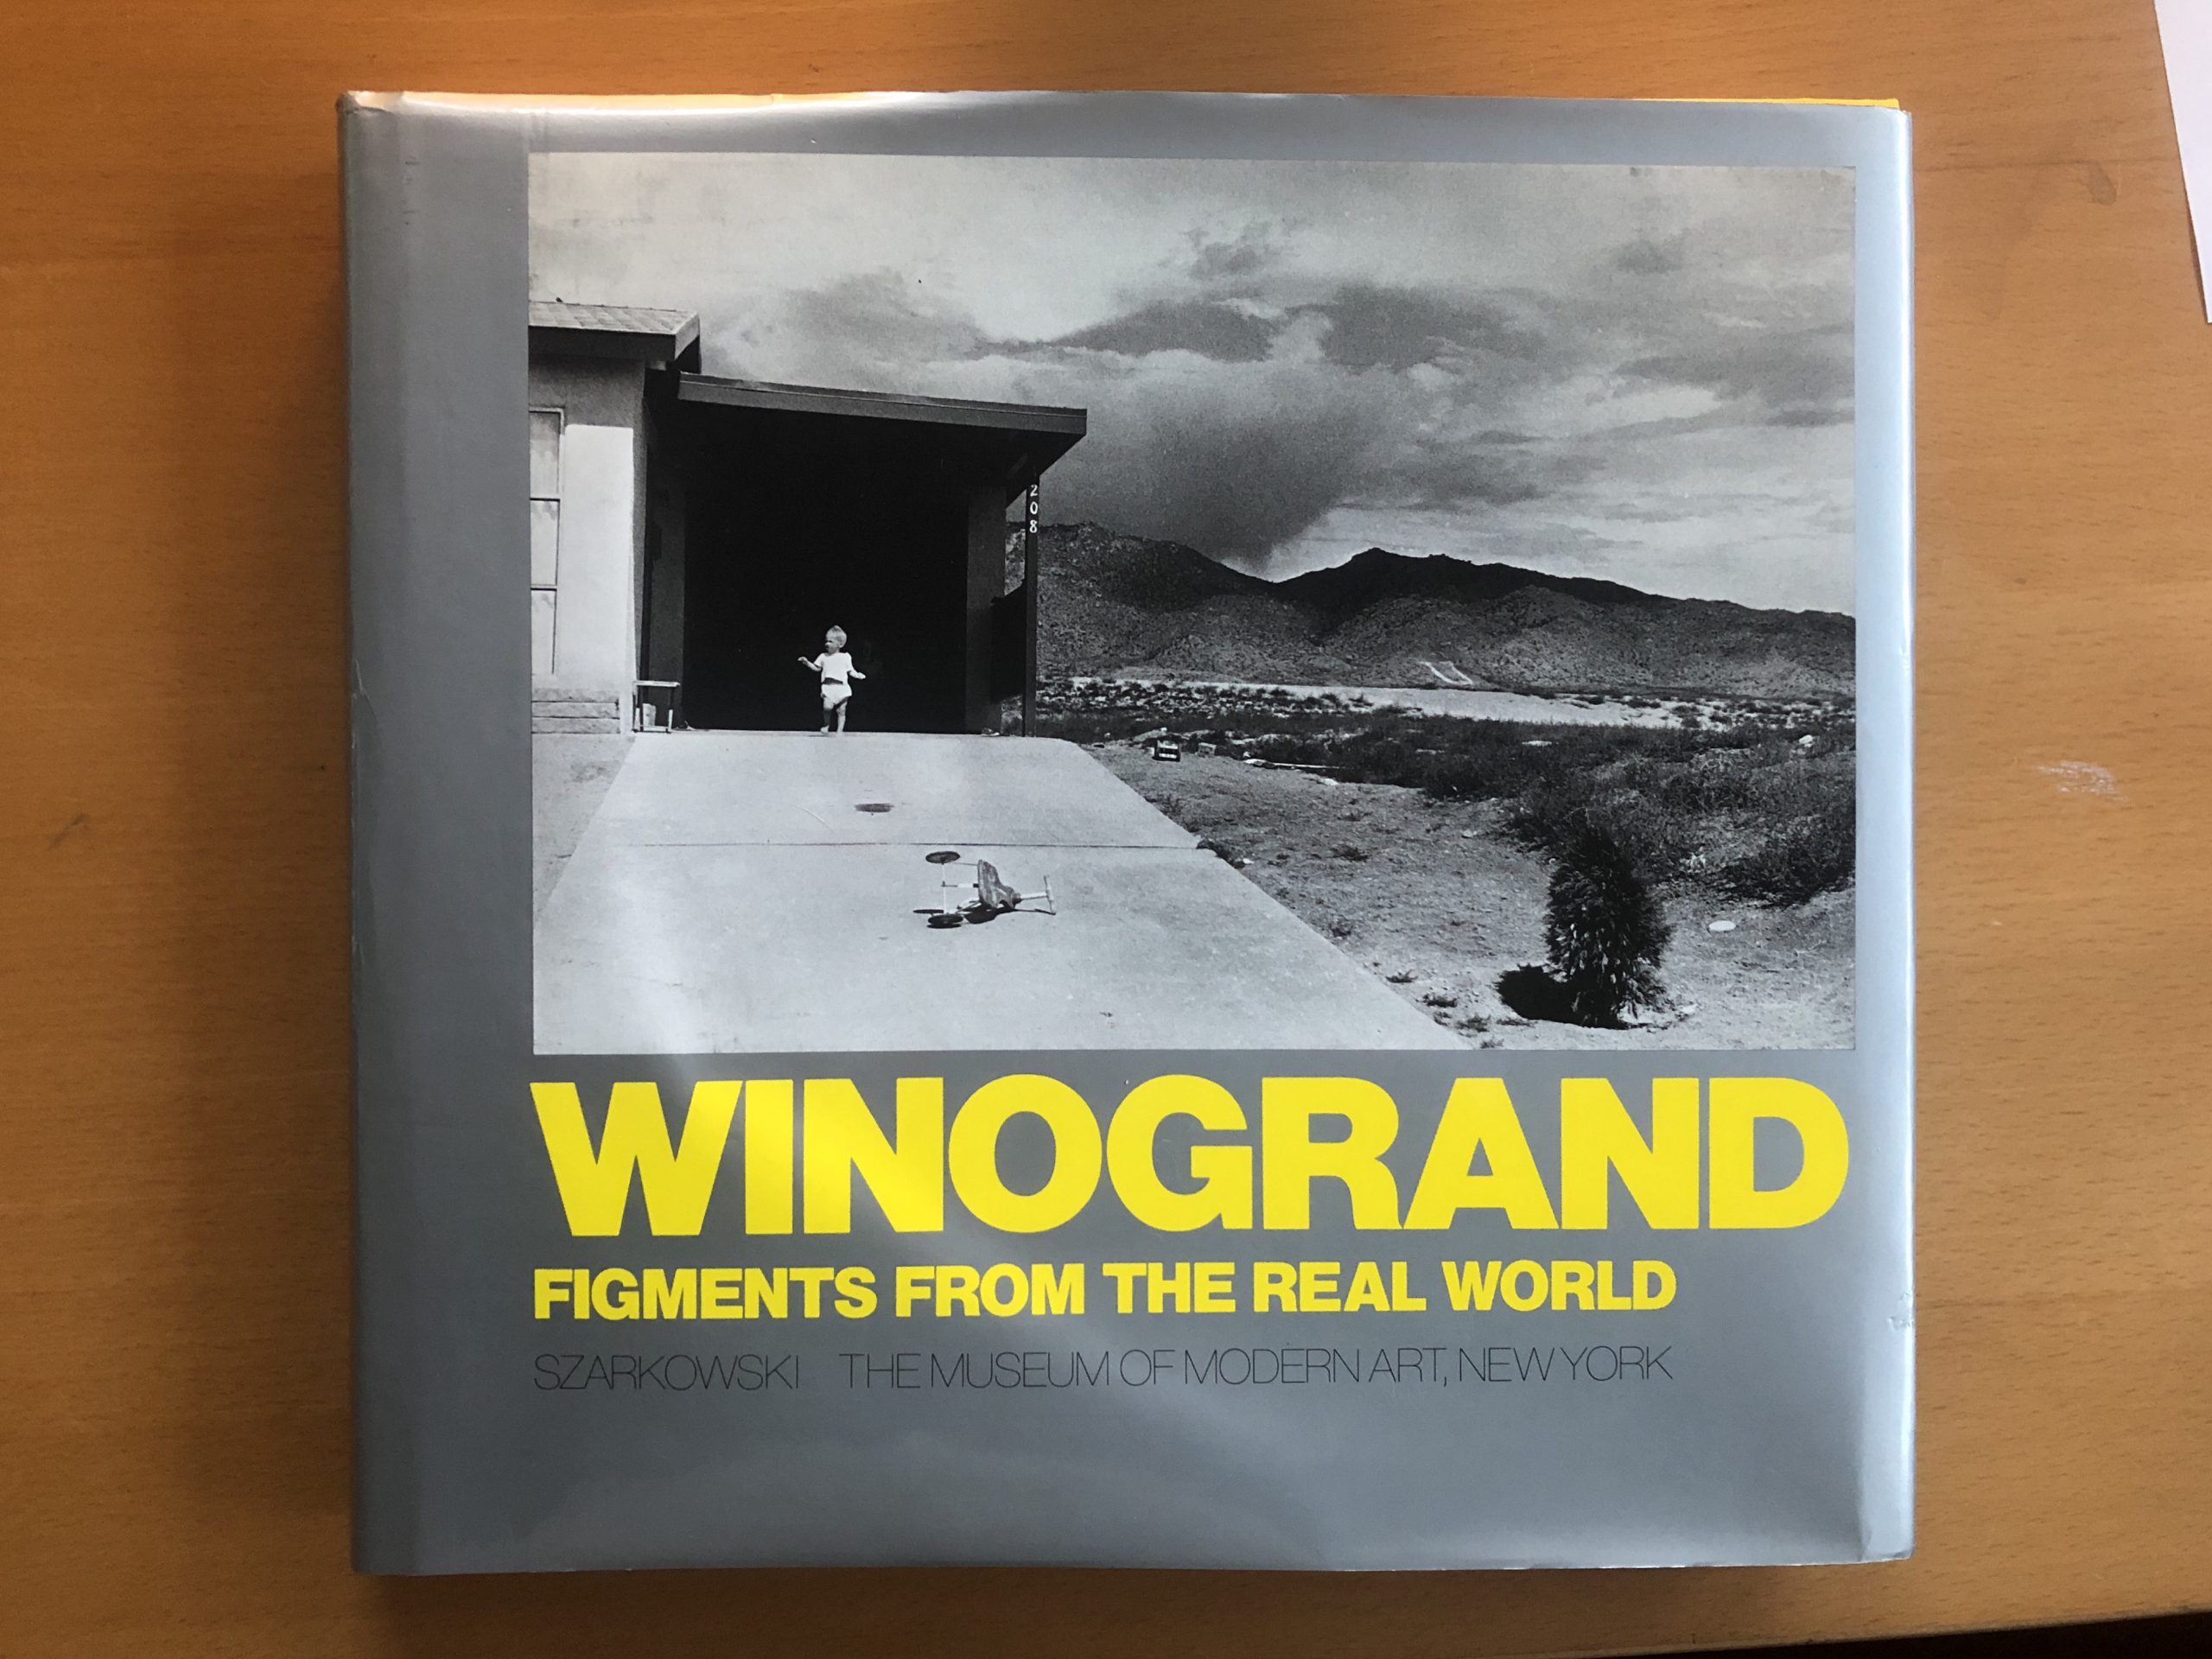 Garry Winogrand - Figments from the real world - Kneut